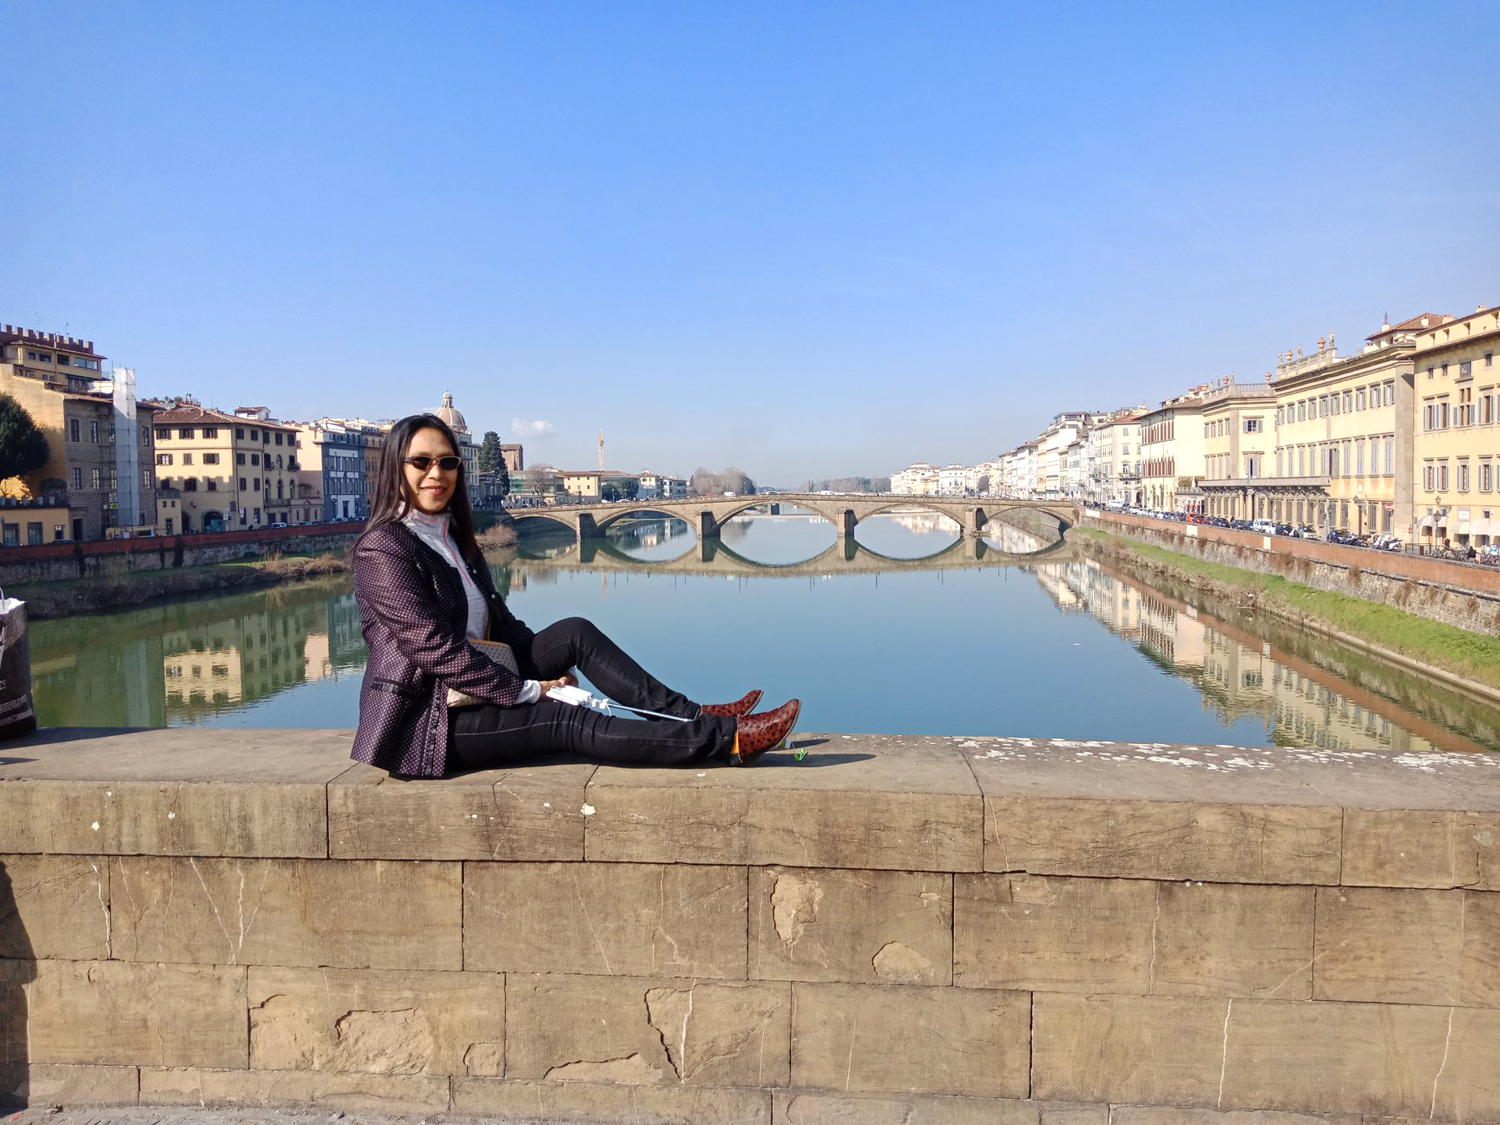 Day 05 -  Hotel Stay in Florence  (1 night)